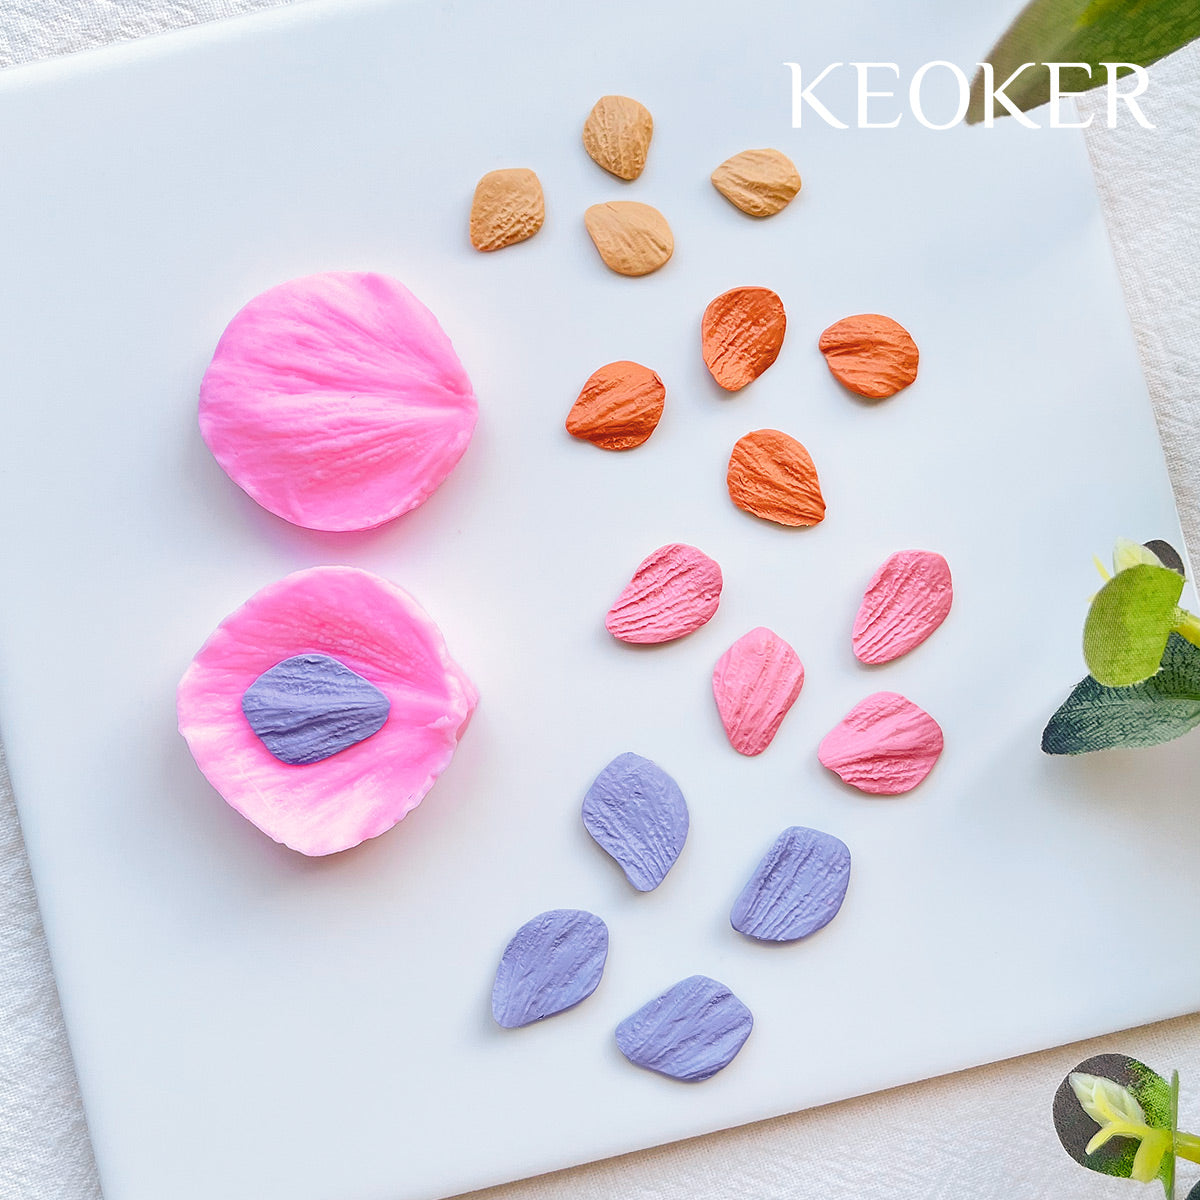 Keoker Flower Petal Clay Cutters - Flower Petals Clay Cutters for Earrings  Making, 6 Shapes with Petal Press Polymer Clay Molds, Clay Cutters for